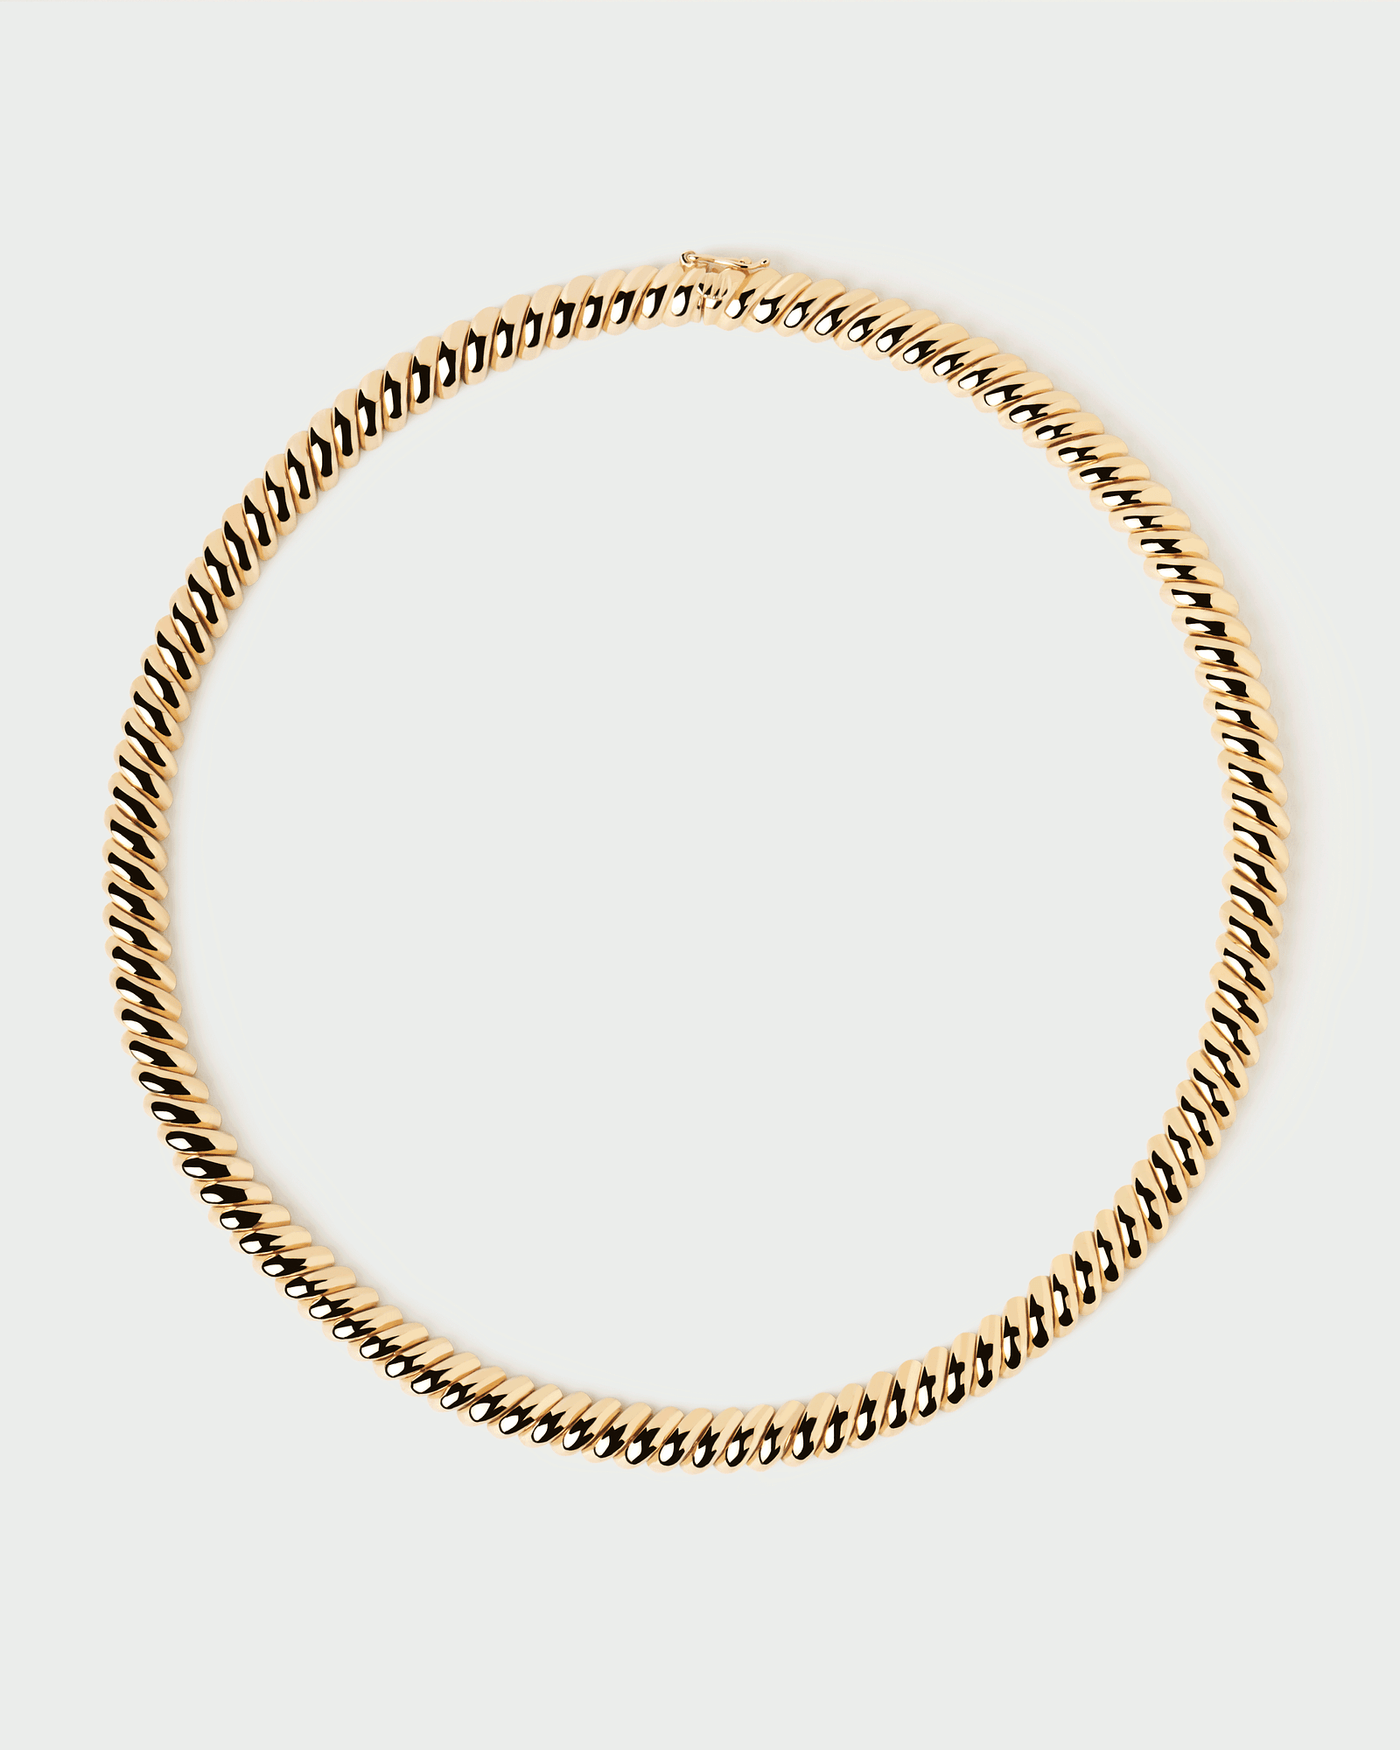 2024 Selection | Gaia Necklace. Gold-plated silver chain necklace with San Marco links. Get the latest arrival from PDPAOLA. Place your order safely and get this Best Seller. Free Shipping.